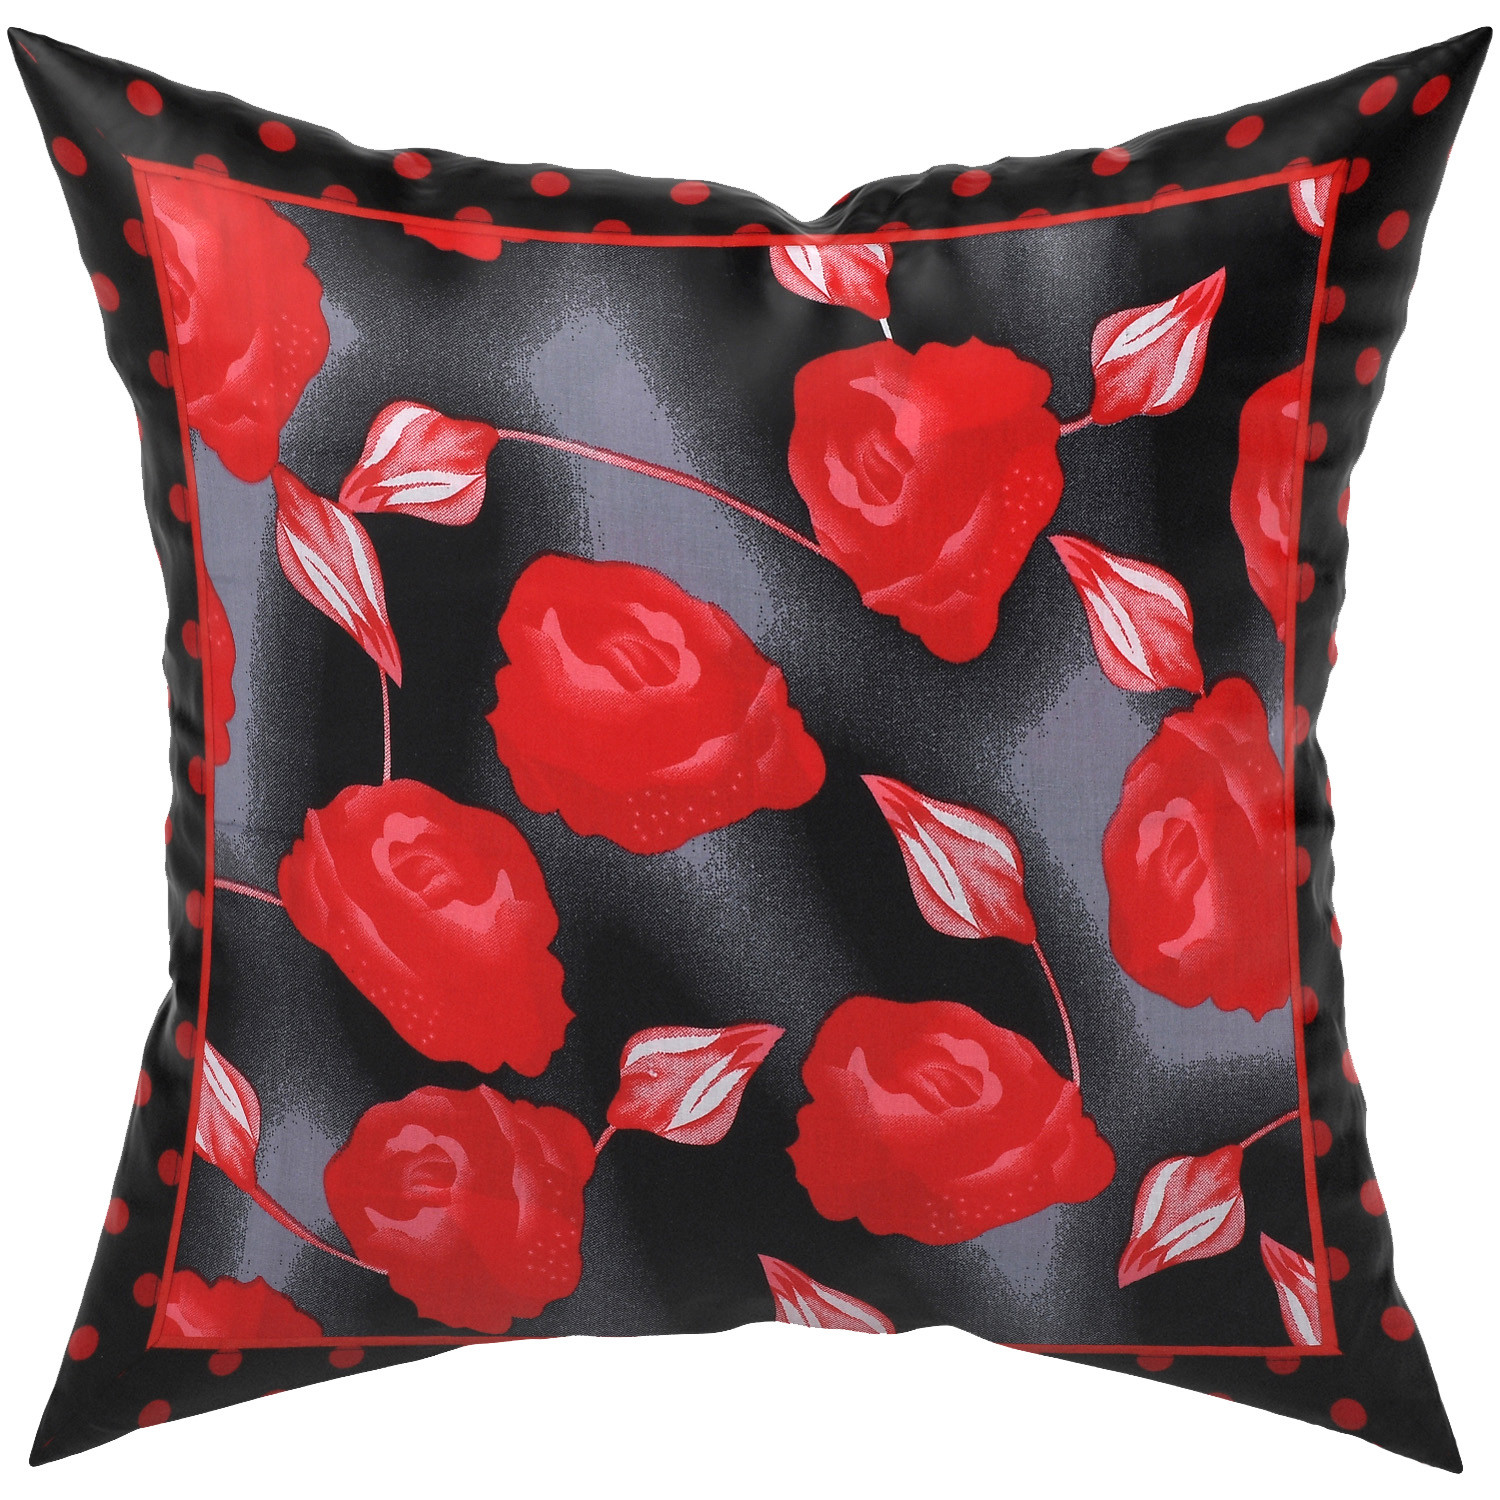 Kuber Industries Cushion Cover|Ractangle Cushion Covers|Sofa Cushion Covers|Cushion Covers 16 inch x 16 inch|Cushion Cover Set of 5|RED